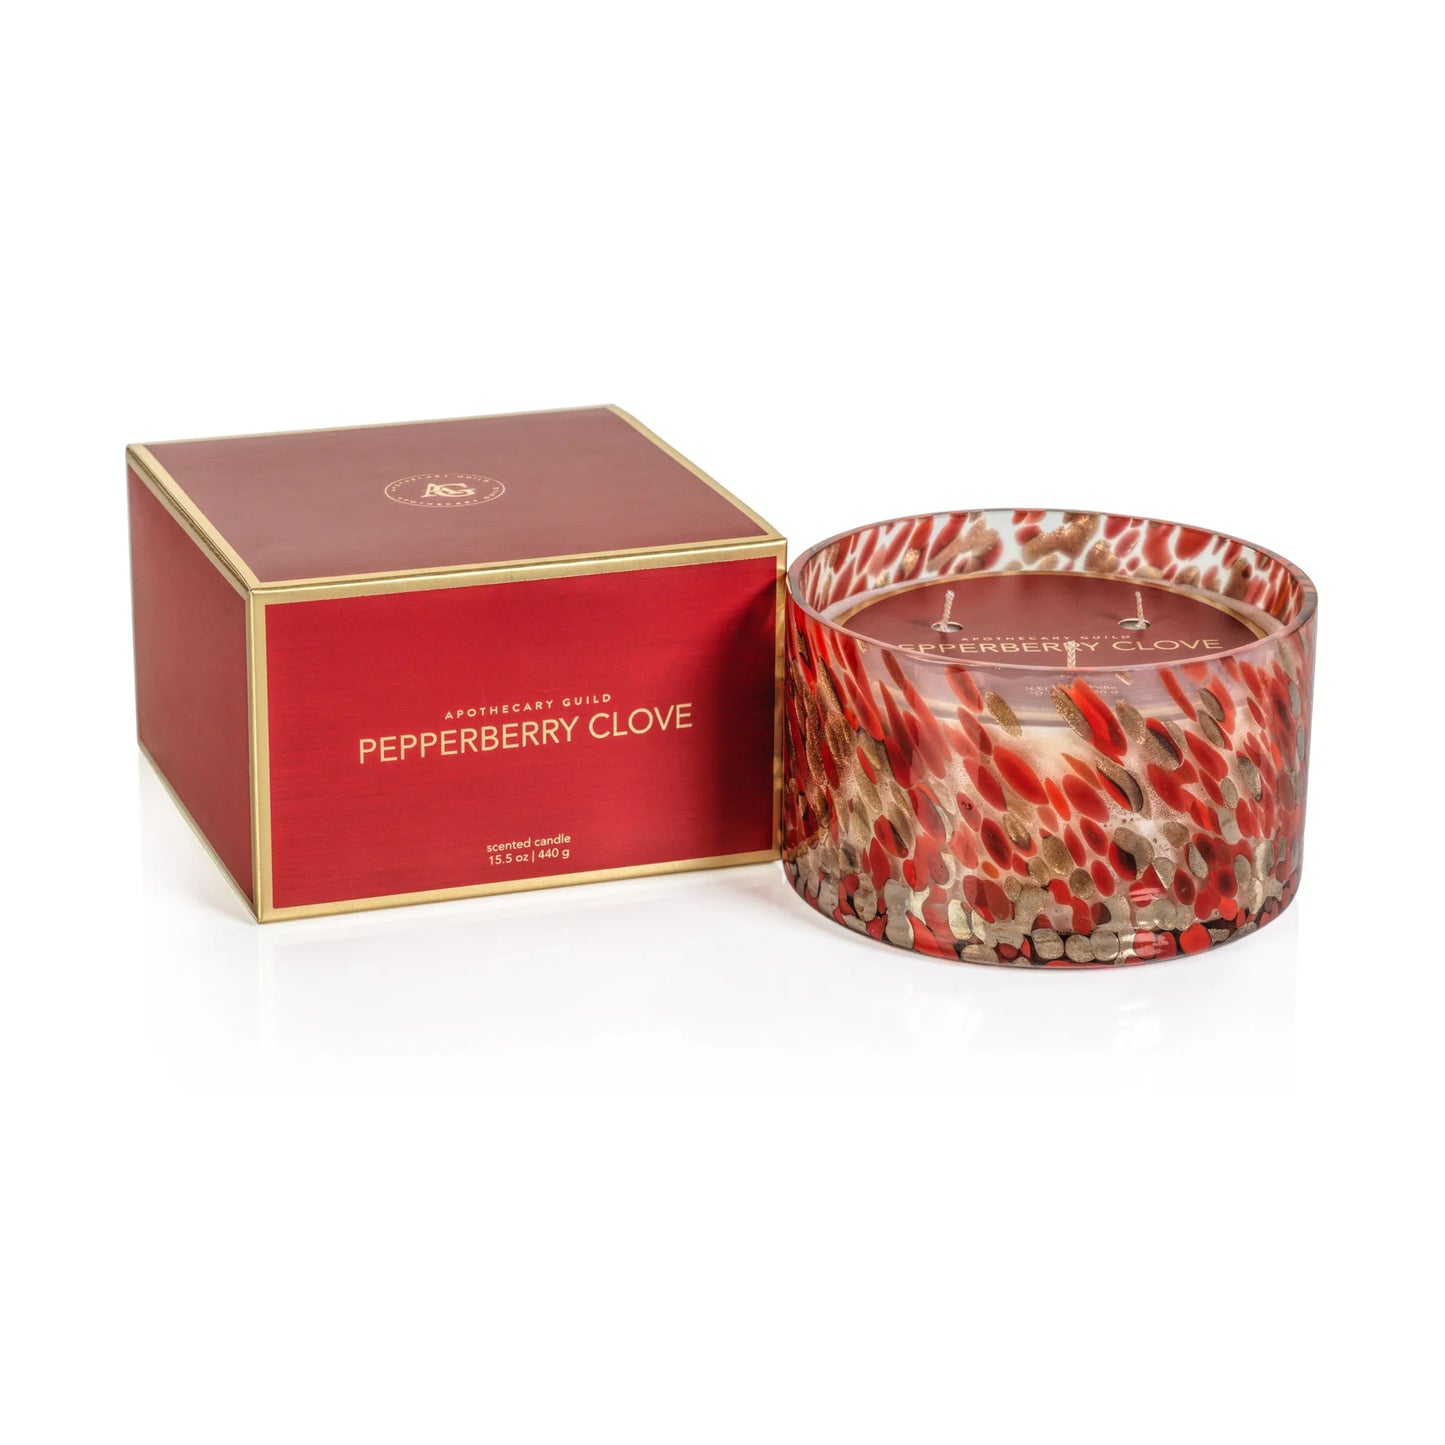 Spangled Glass Scented Candle